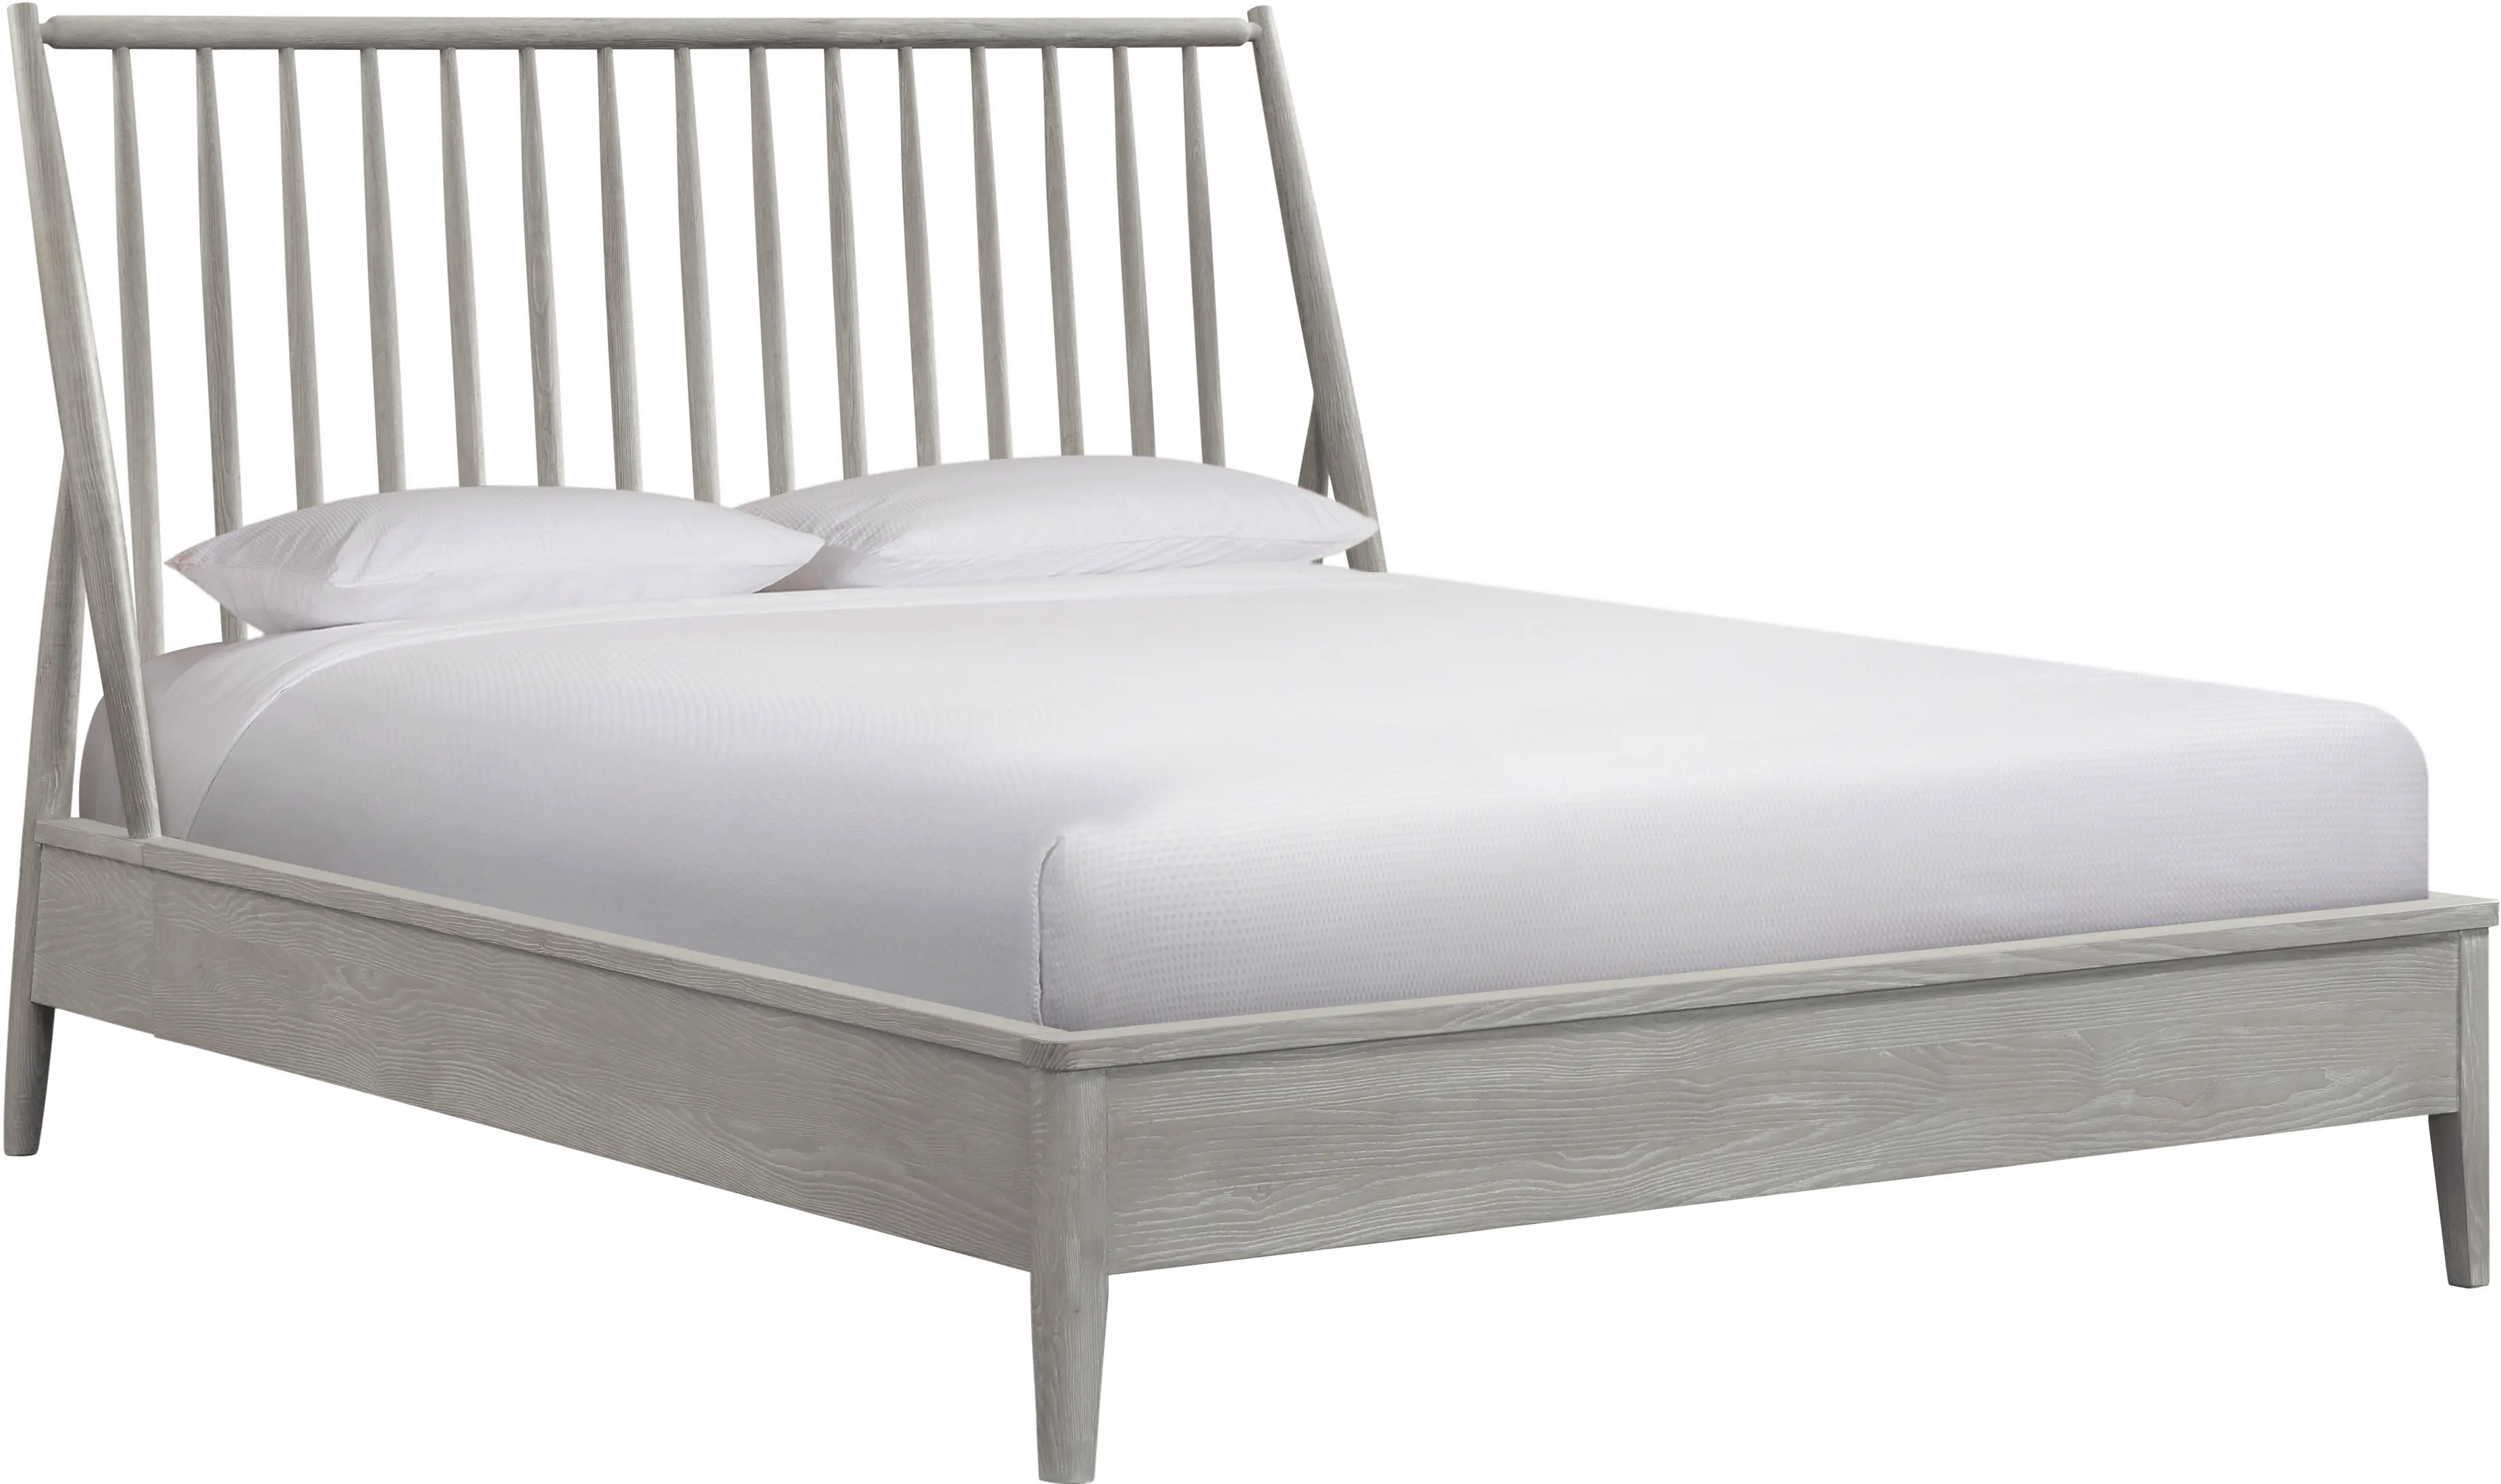 Bayside White Queen Bed